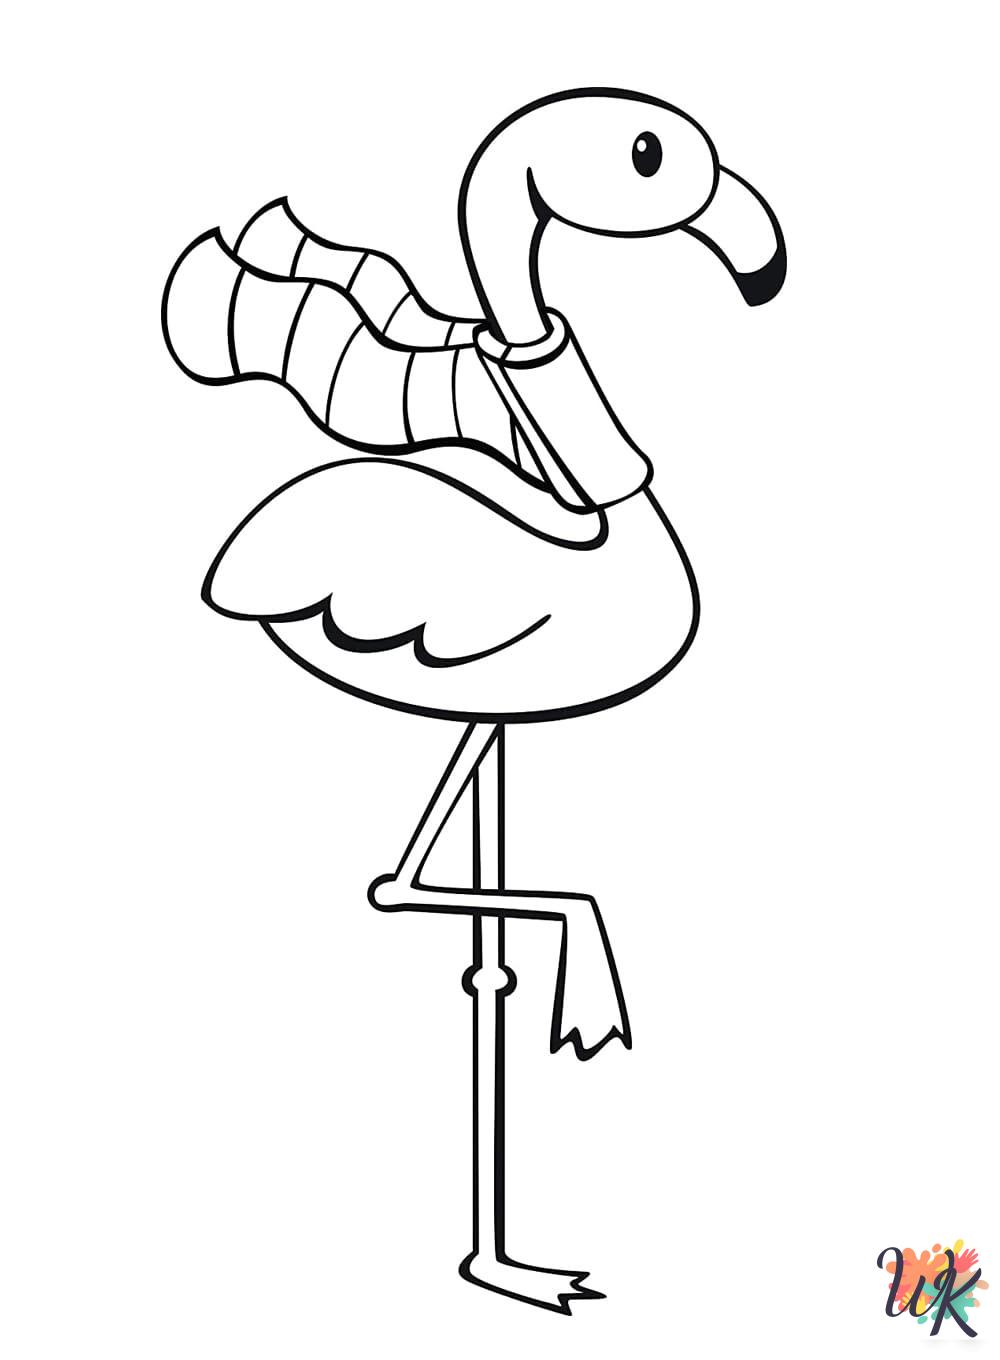 Flamingo cards coloring pages